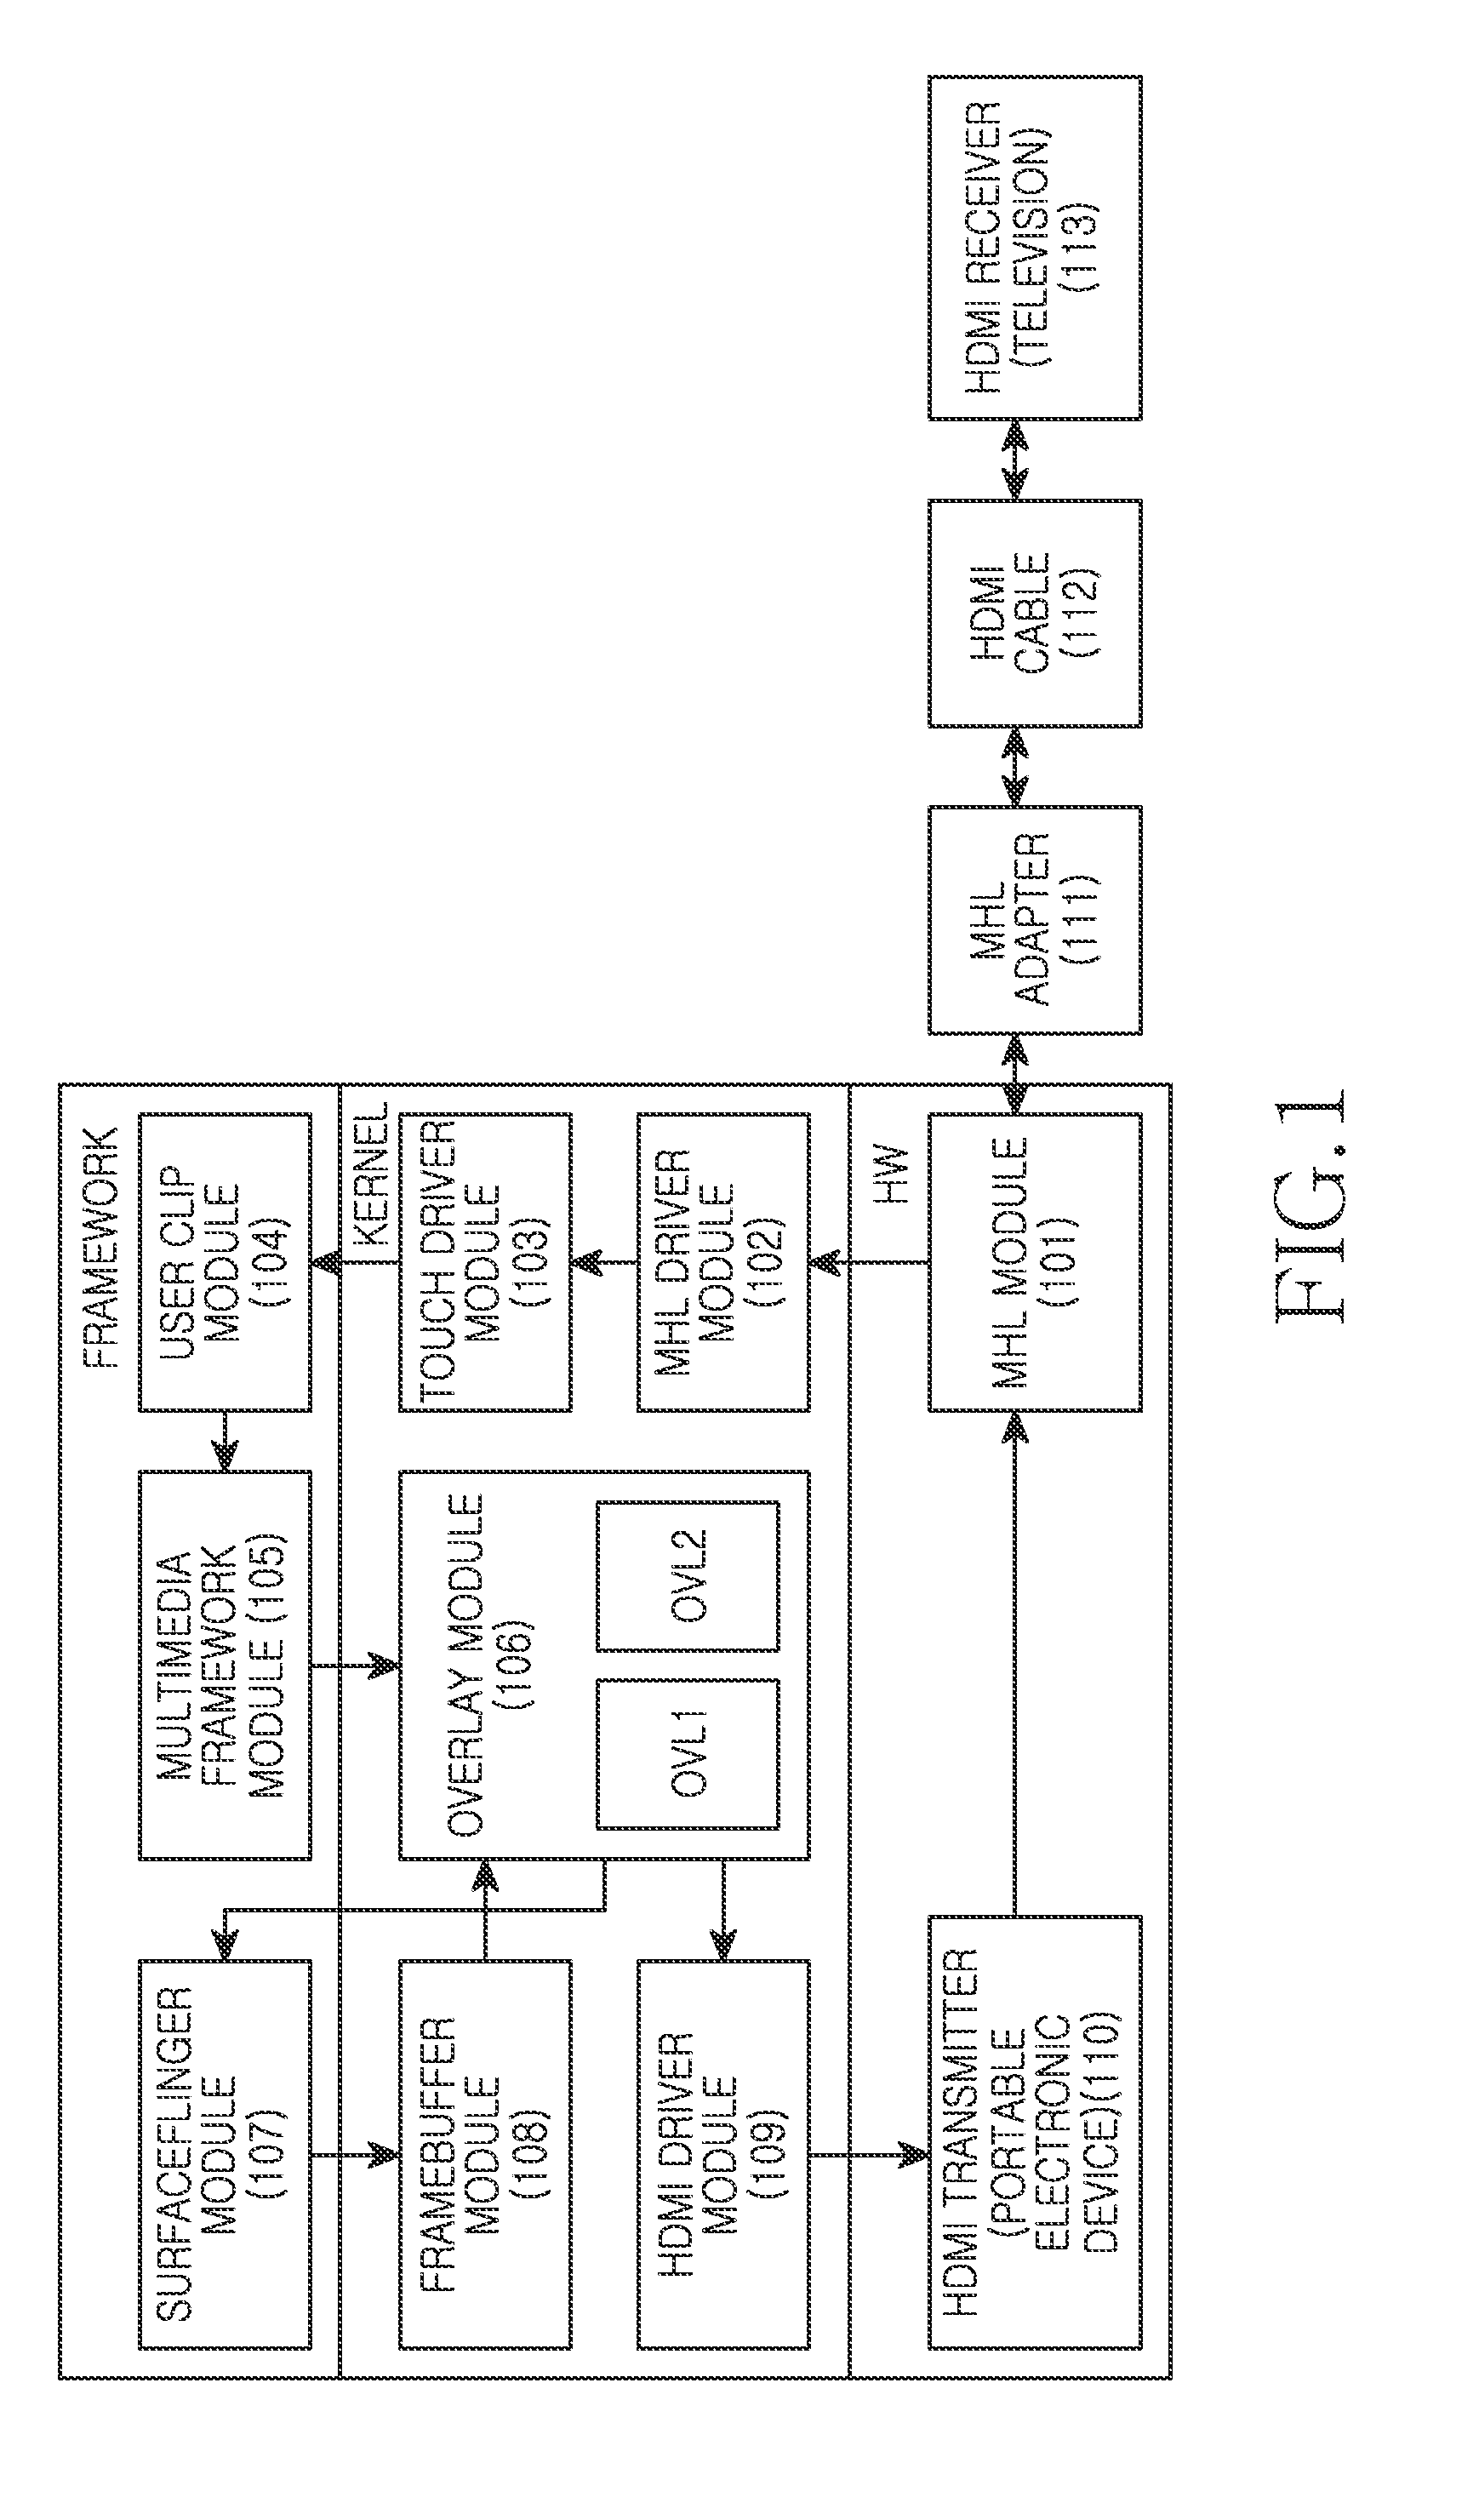 Apparatus and method of portable terminal for dual display of broadcasting receiver by HDMI signal